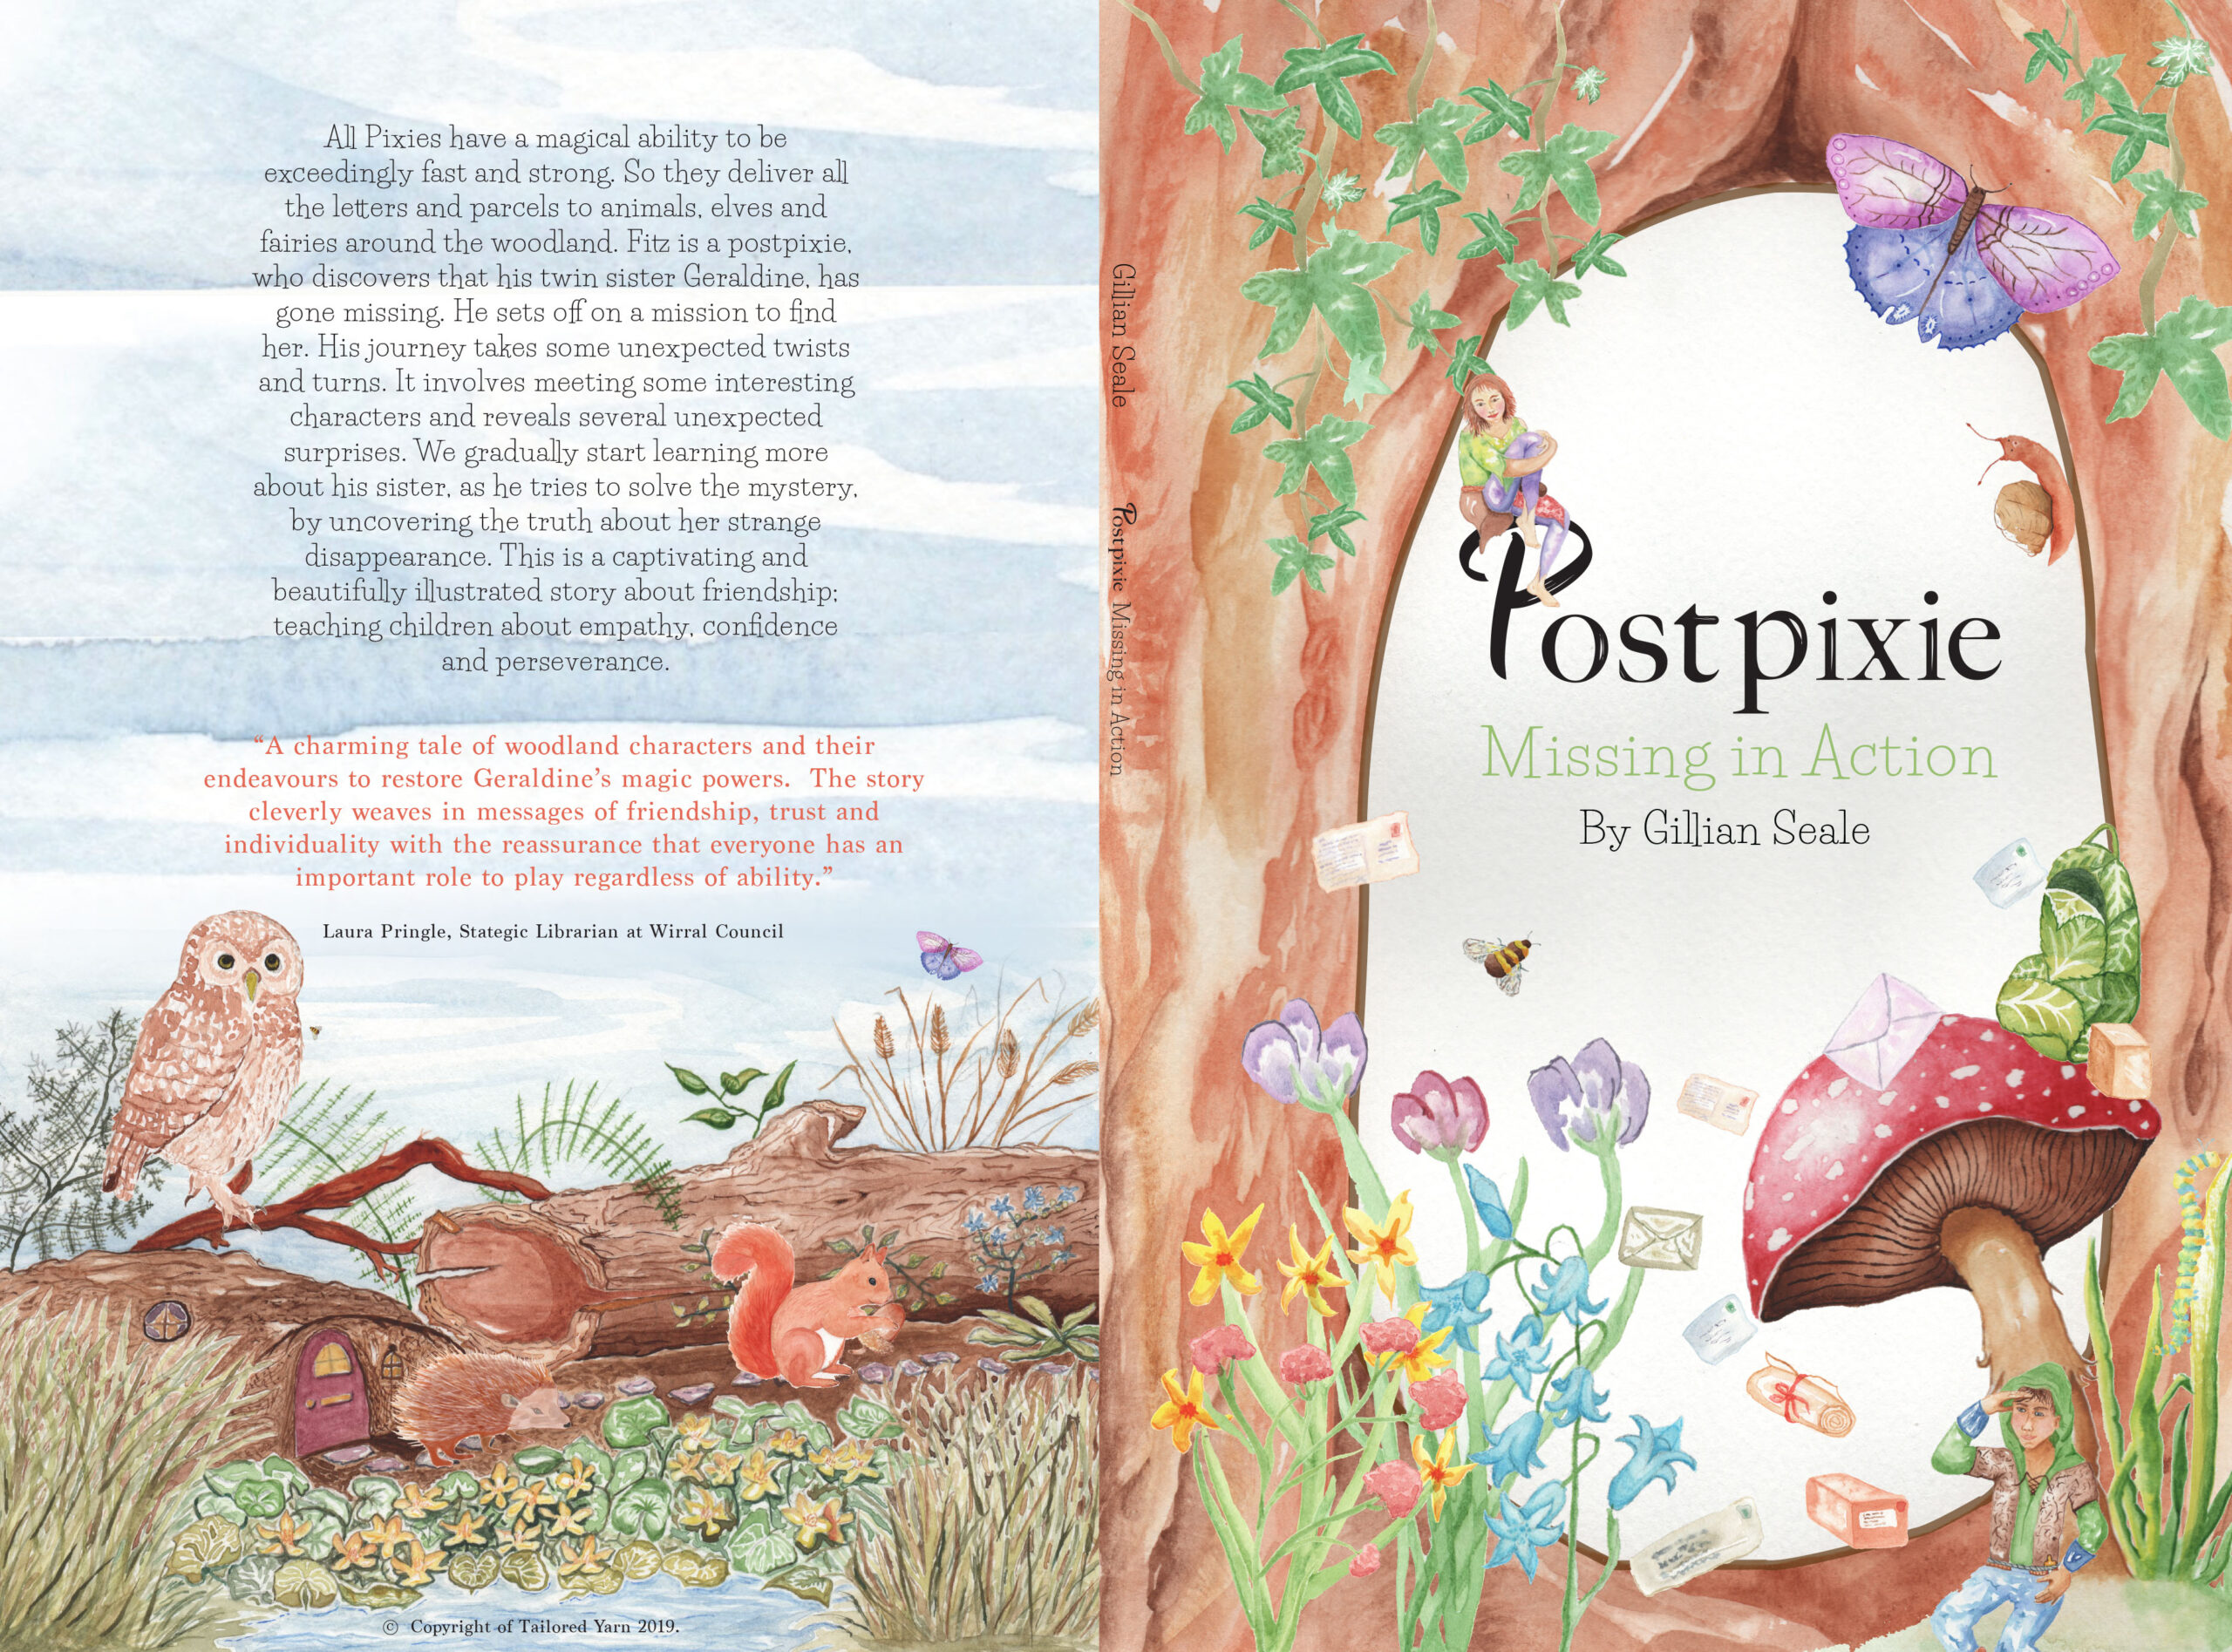 Postpixie by Gillian Seale front and back cover